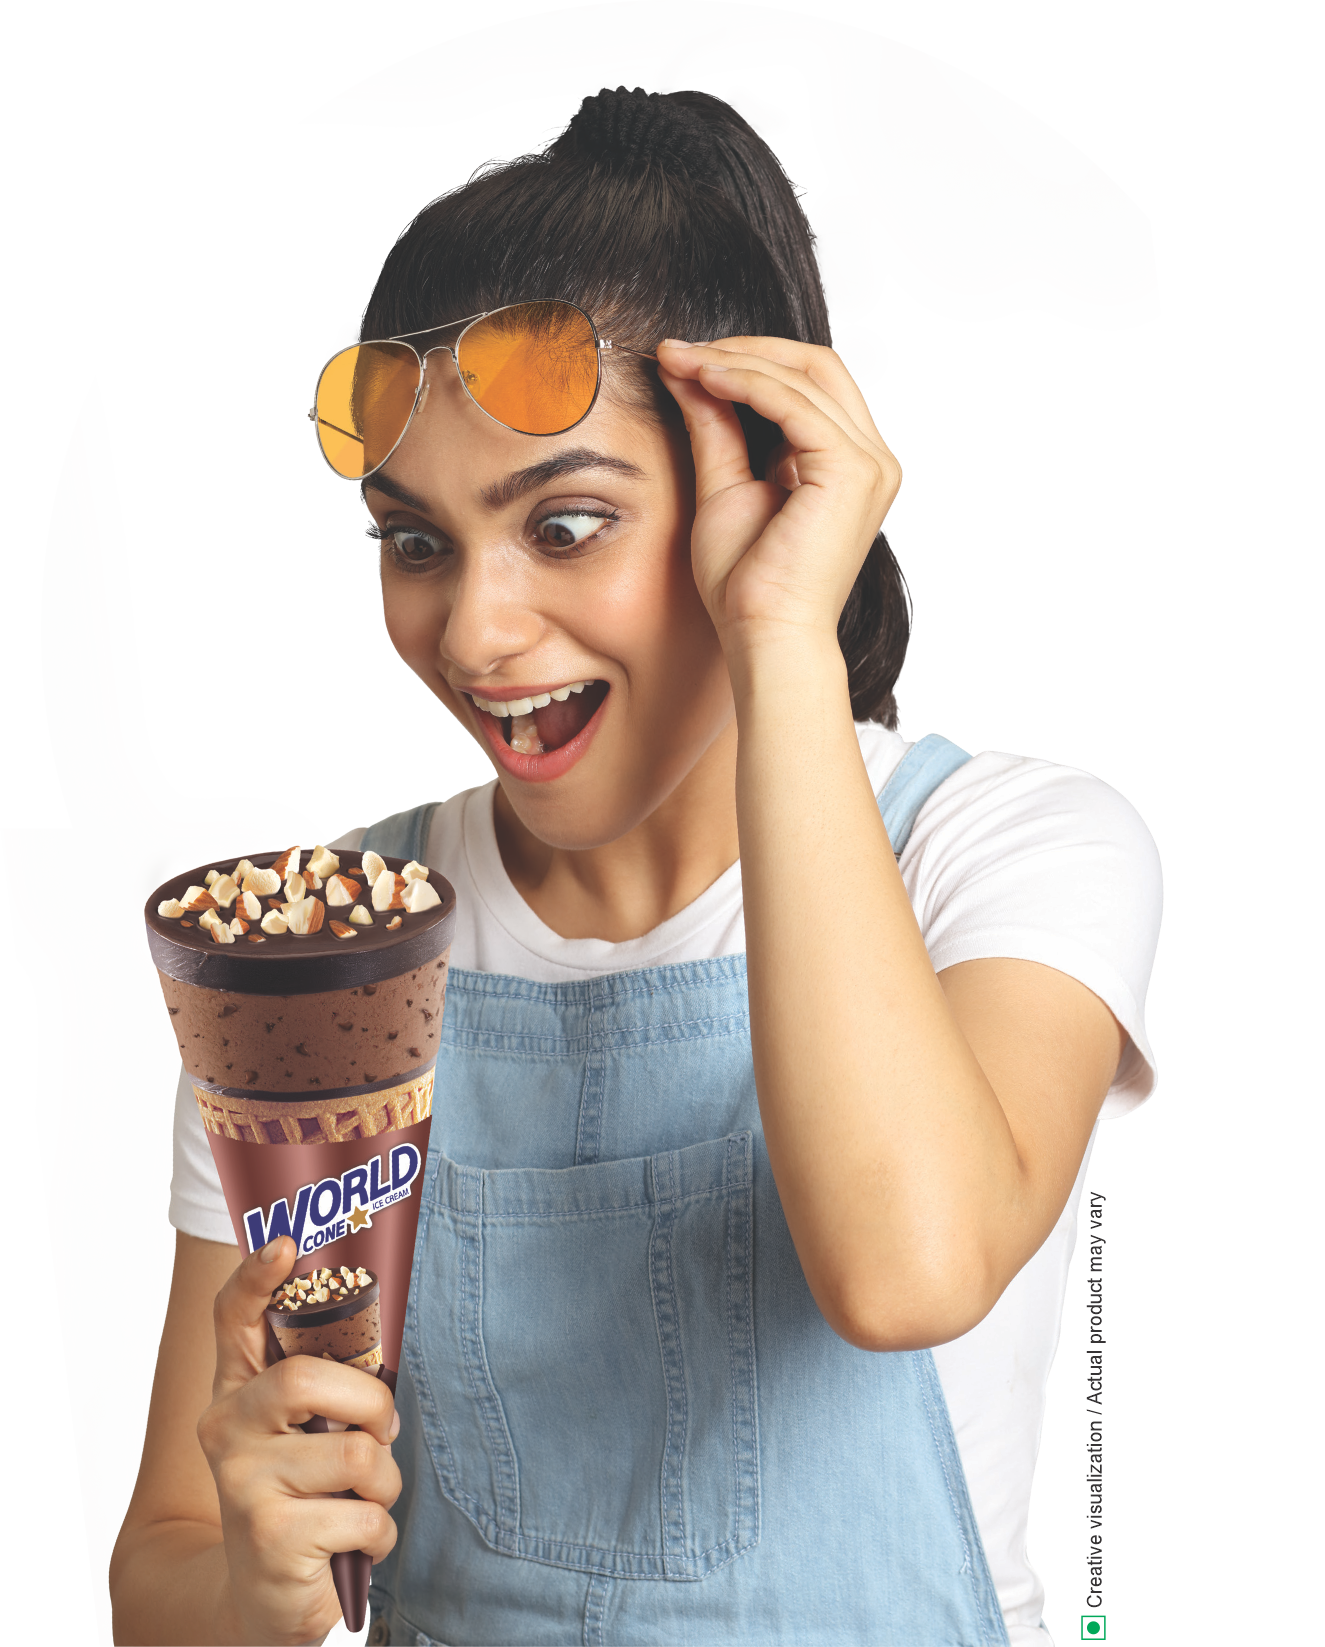 Havmor launches ‘World Cone’ with 3 new distinctive flavours in India decoding=